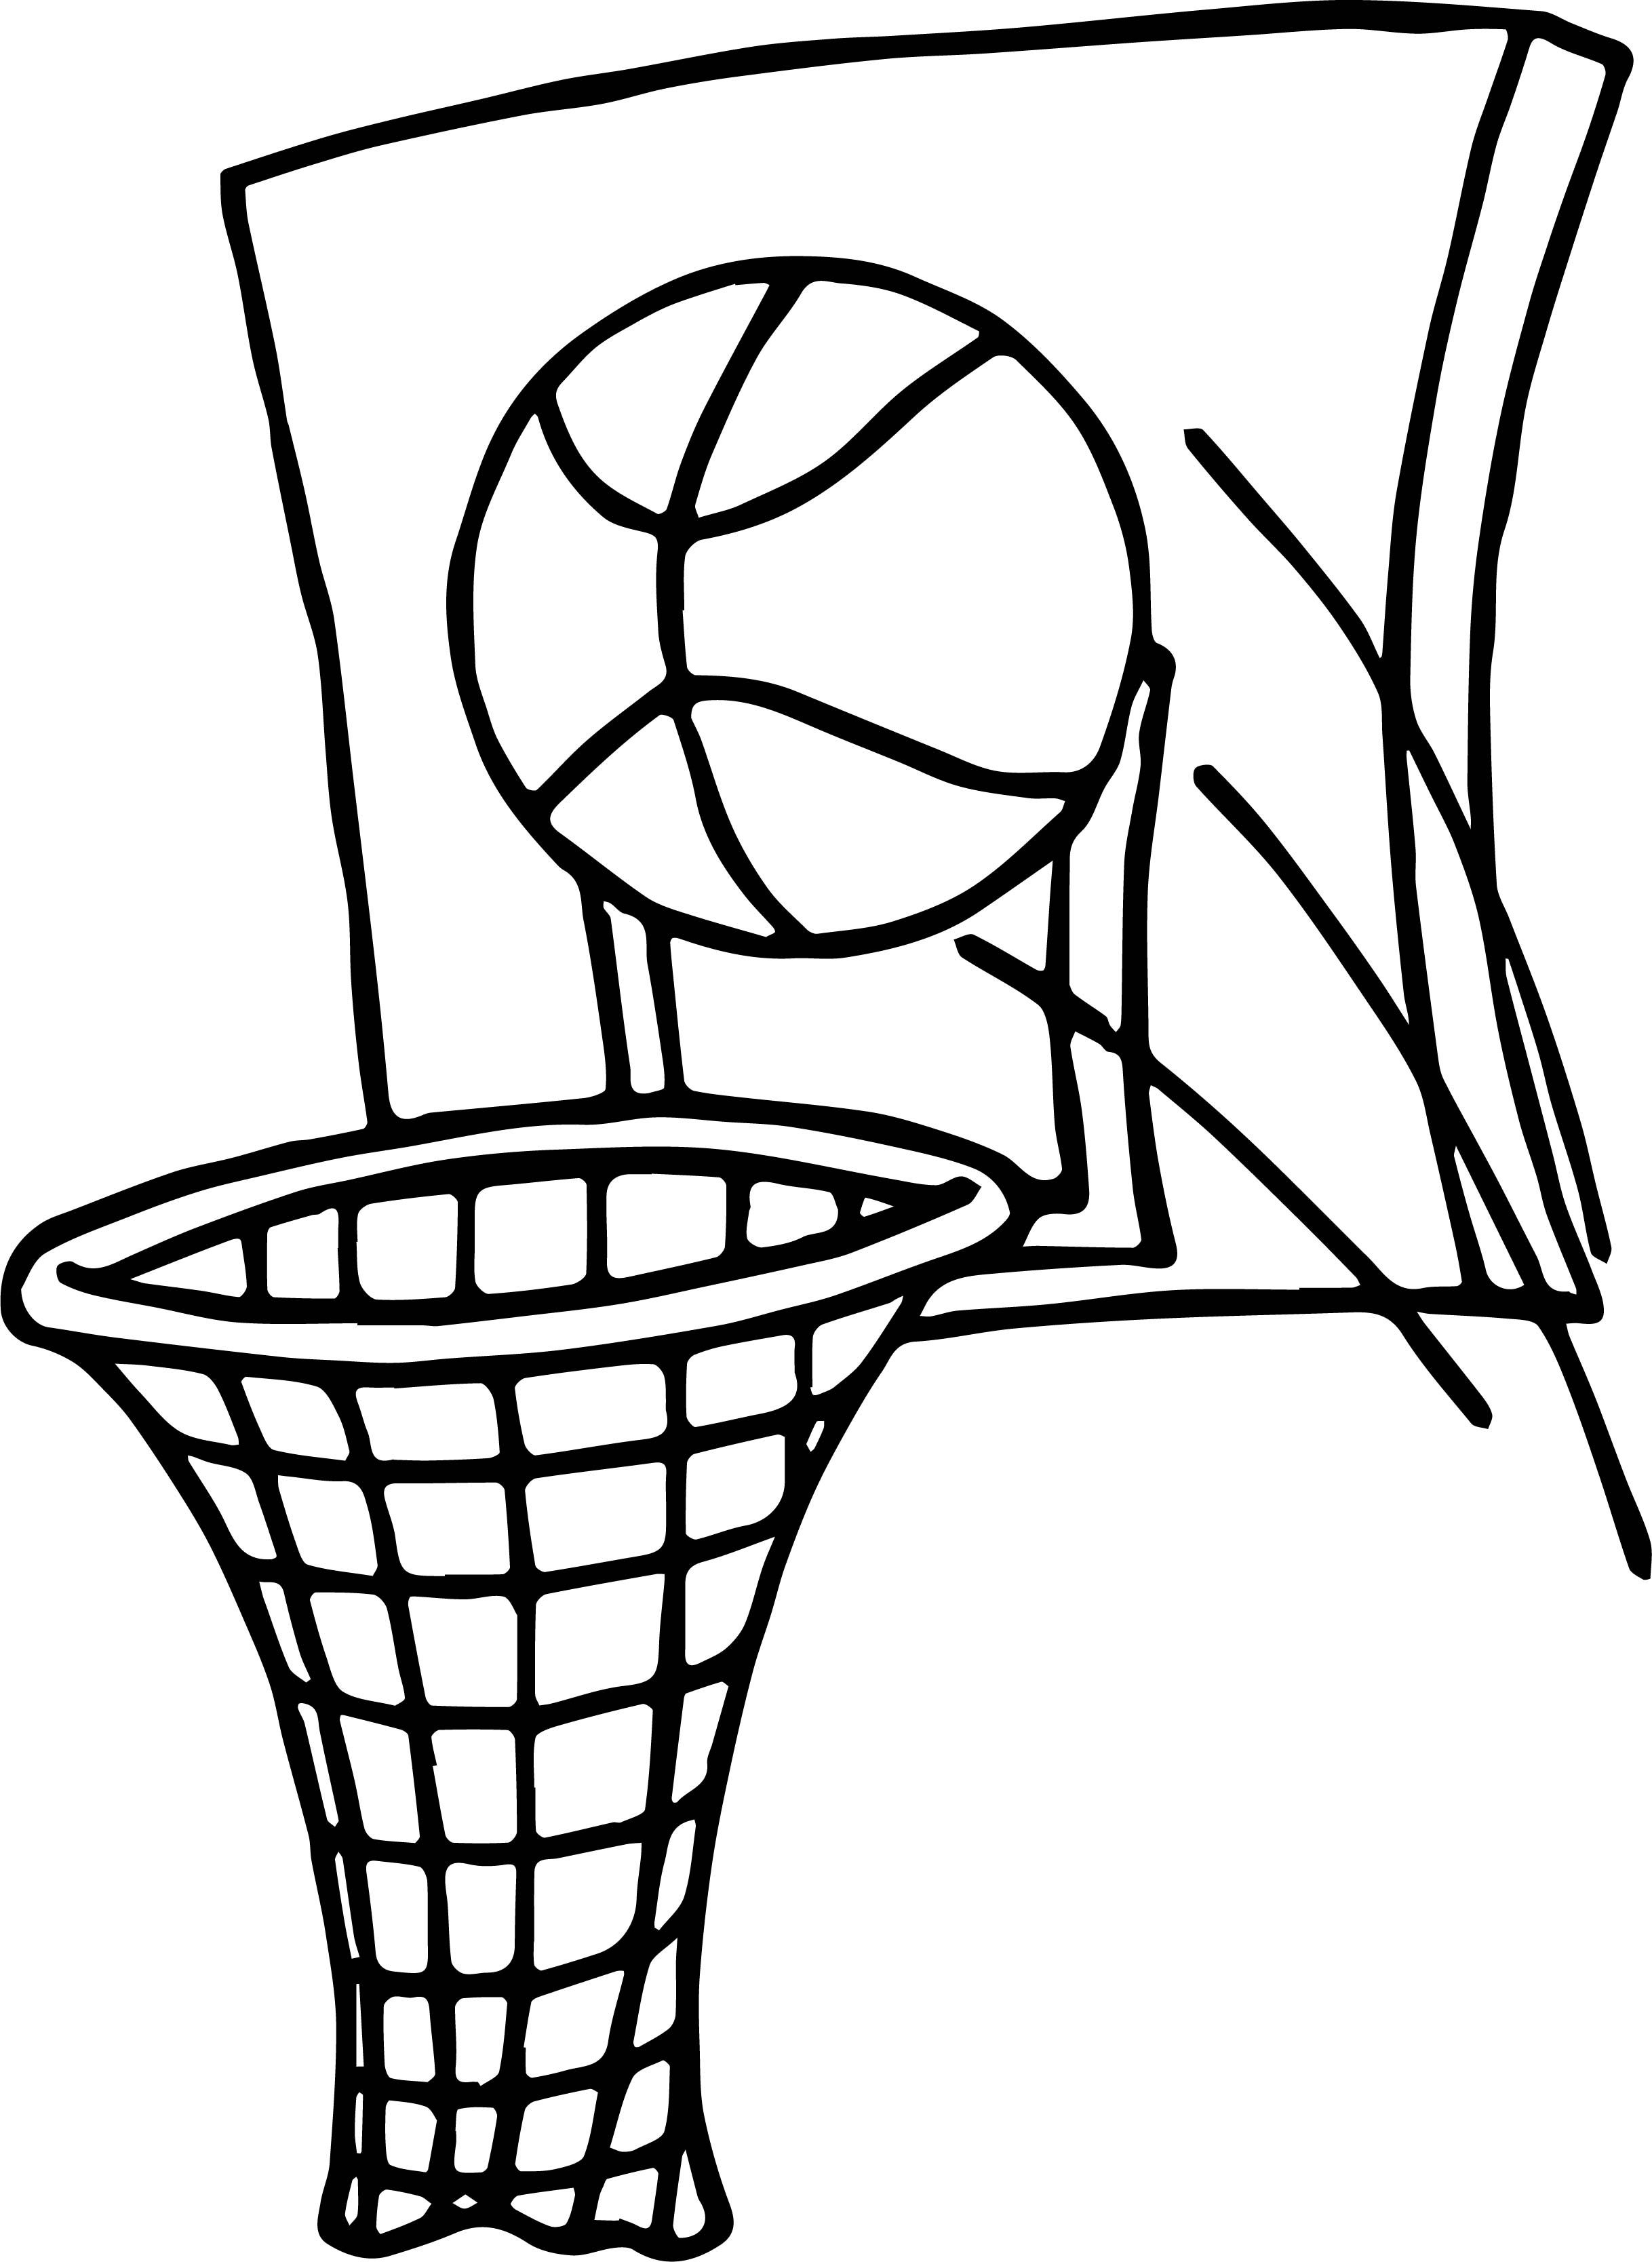 Ball Shot Playing Basketball Coloring Page - Wecoloringpage.com | Sports coloring  pages, Basketball drawings, Coloring pages